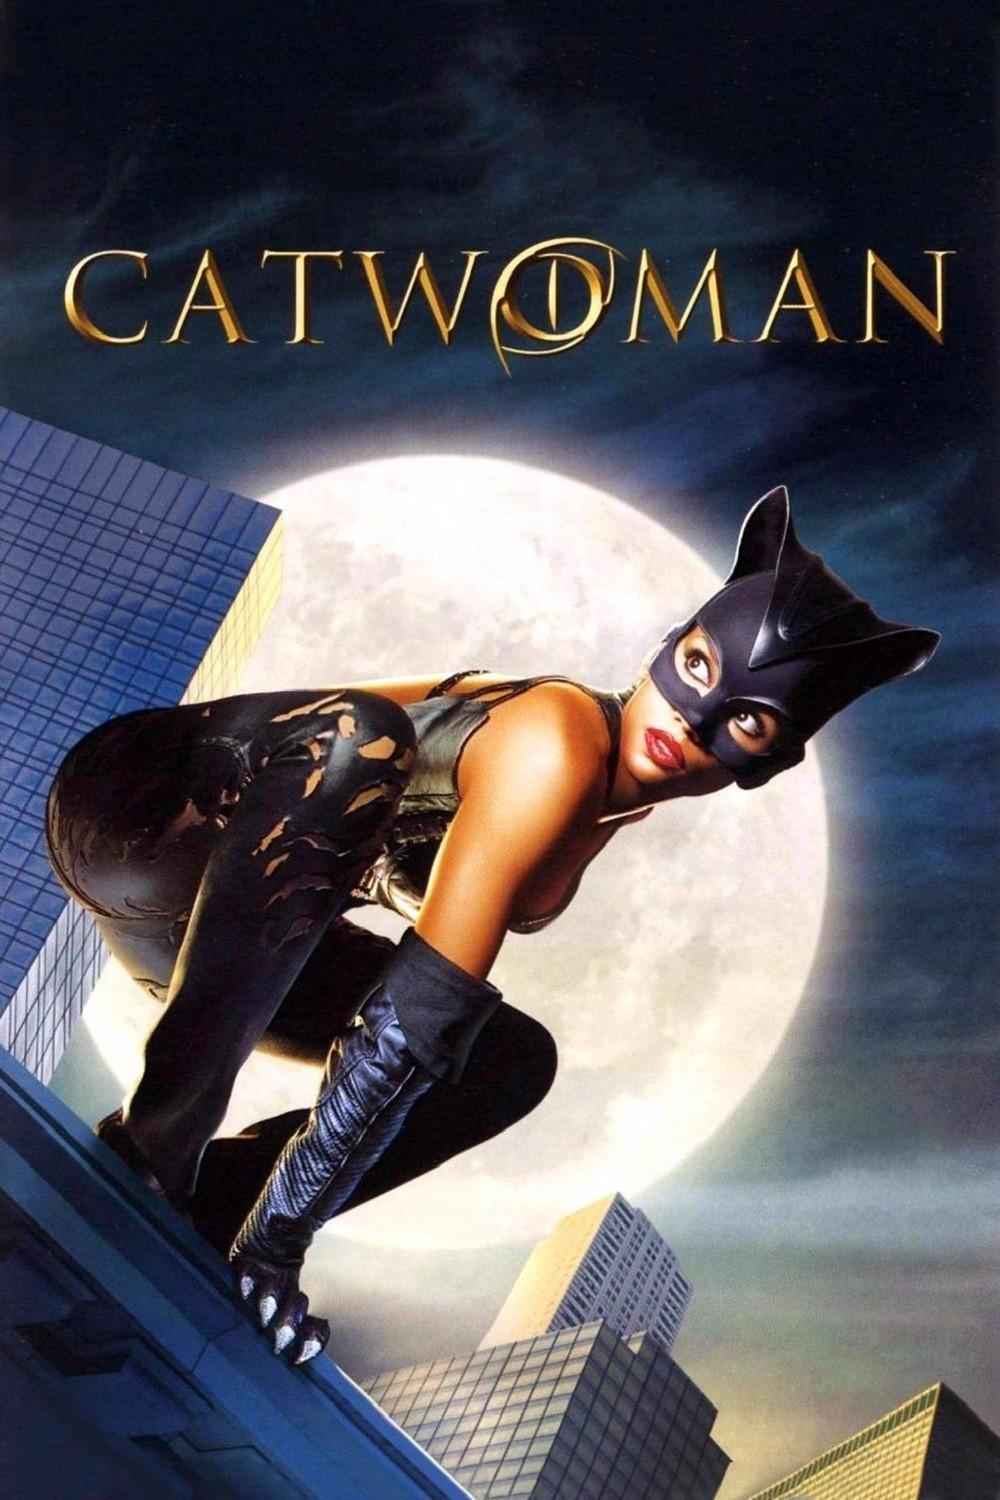 5. Catwoman